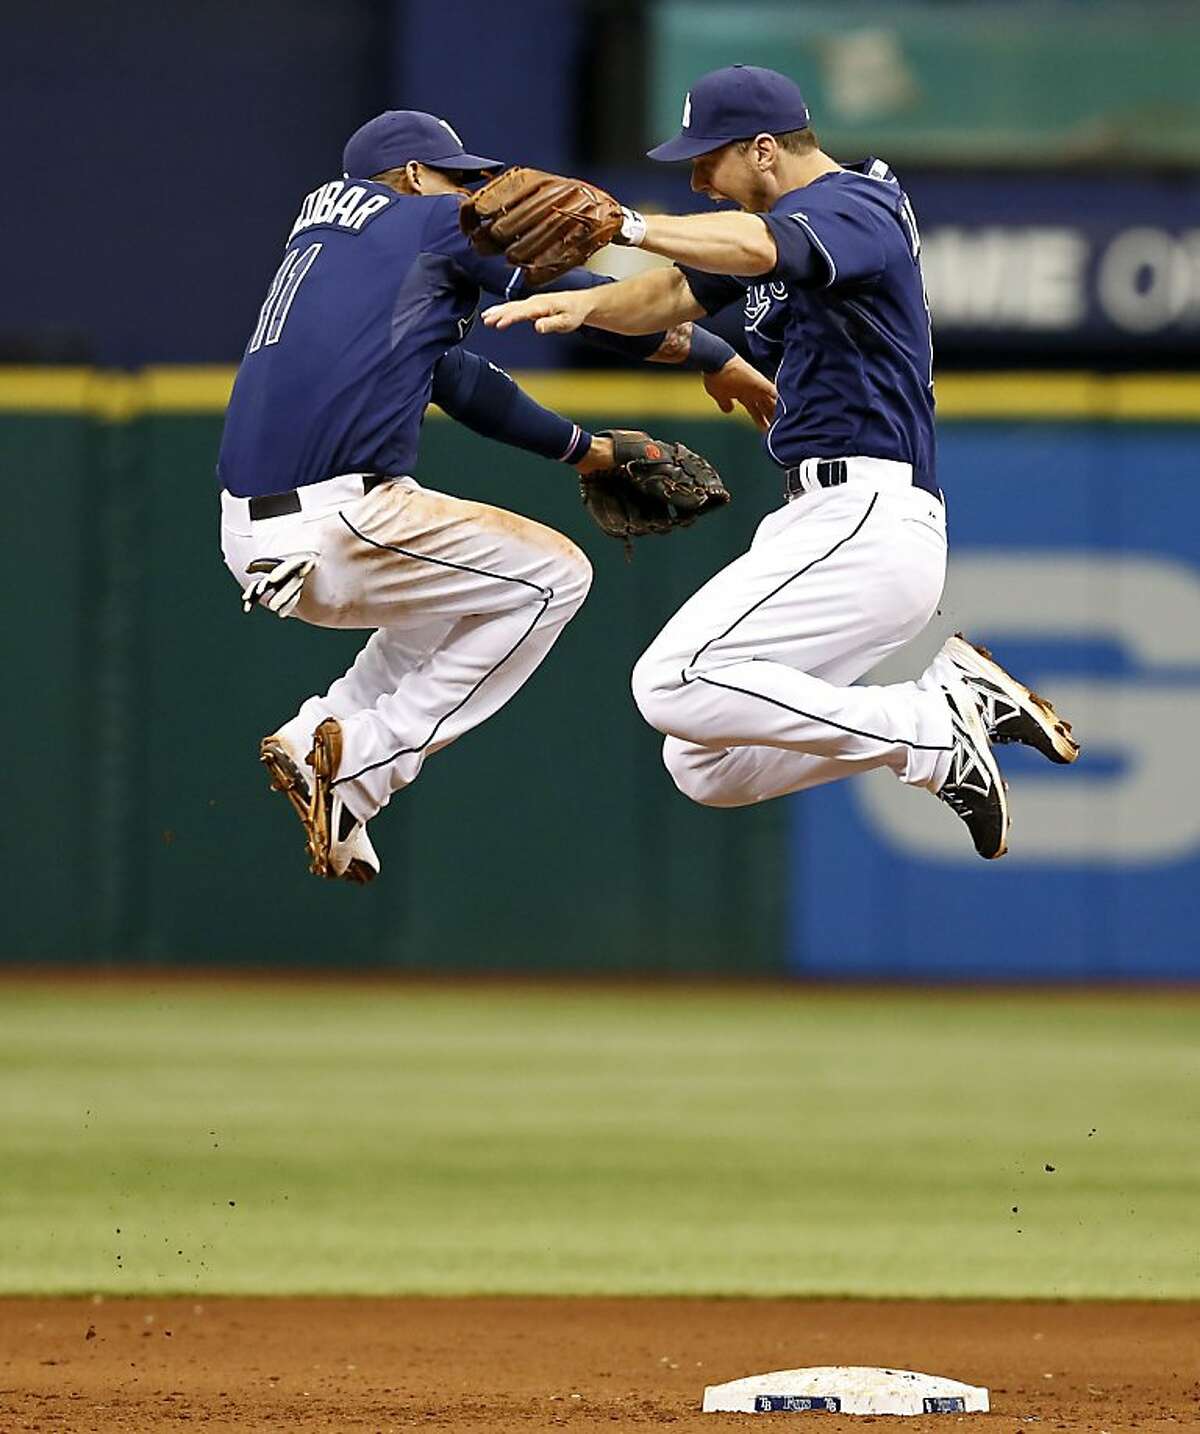 Tampa Bay Rays' Ben Zobrist, right, and Yunel Escobar celebrate at the end of a baseball game against the Minnesota Twins Thursday, July 11, 2013, in St. Petersburg, Fla. The Rays won 4-3. (AP Photo/Mike Carlson)